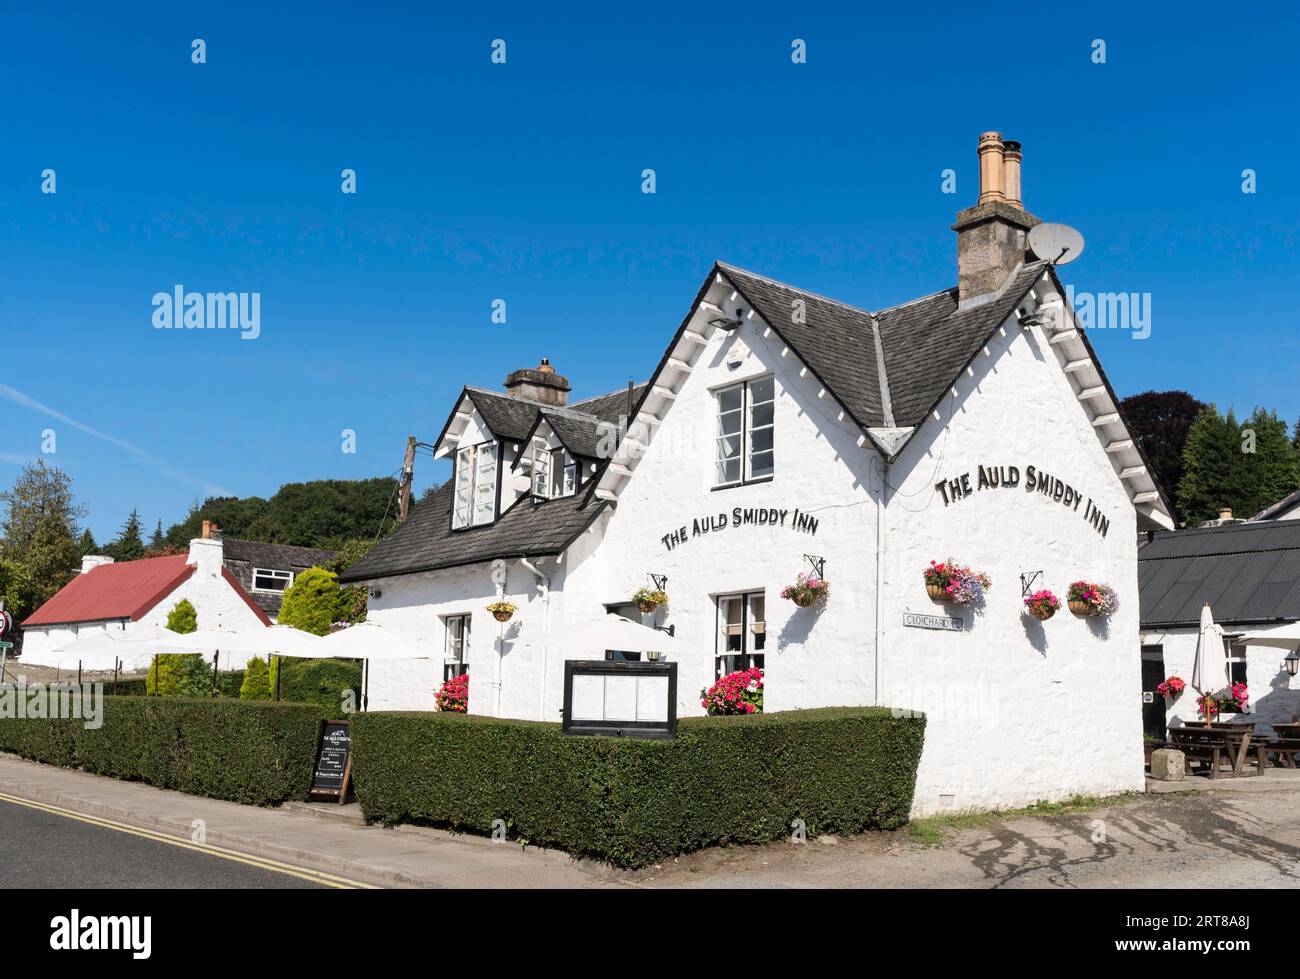 The Auld Smiddy Inn, previously a blacksmith's forge, in Pitlochry, Scotland, UK Stock Photo